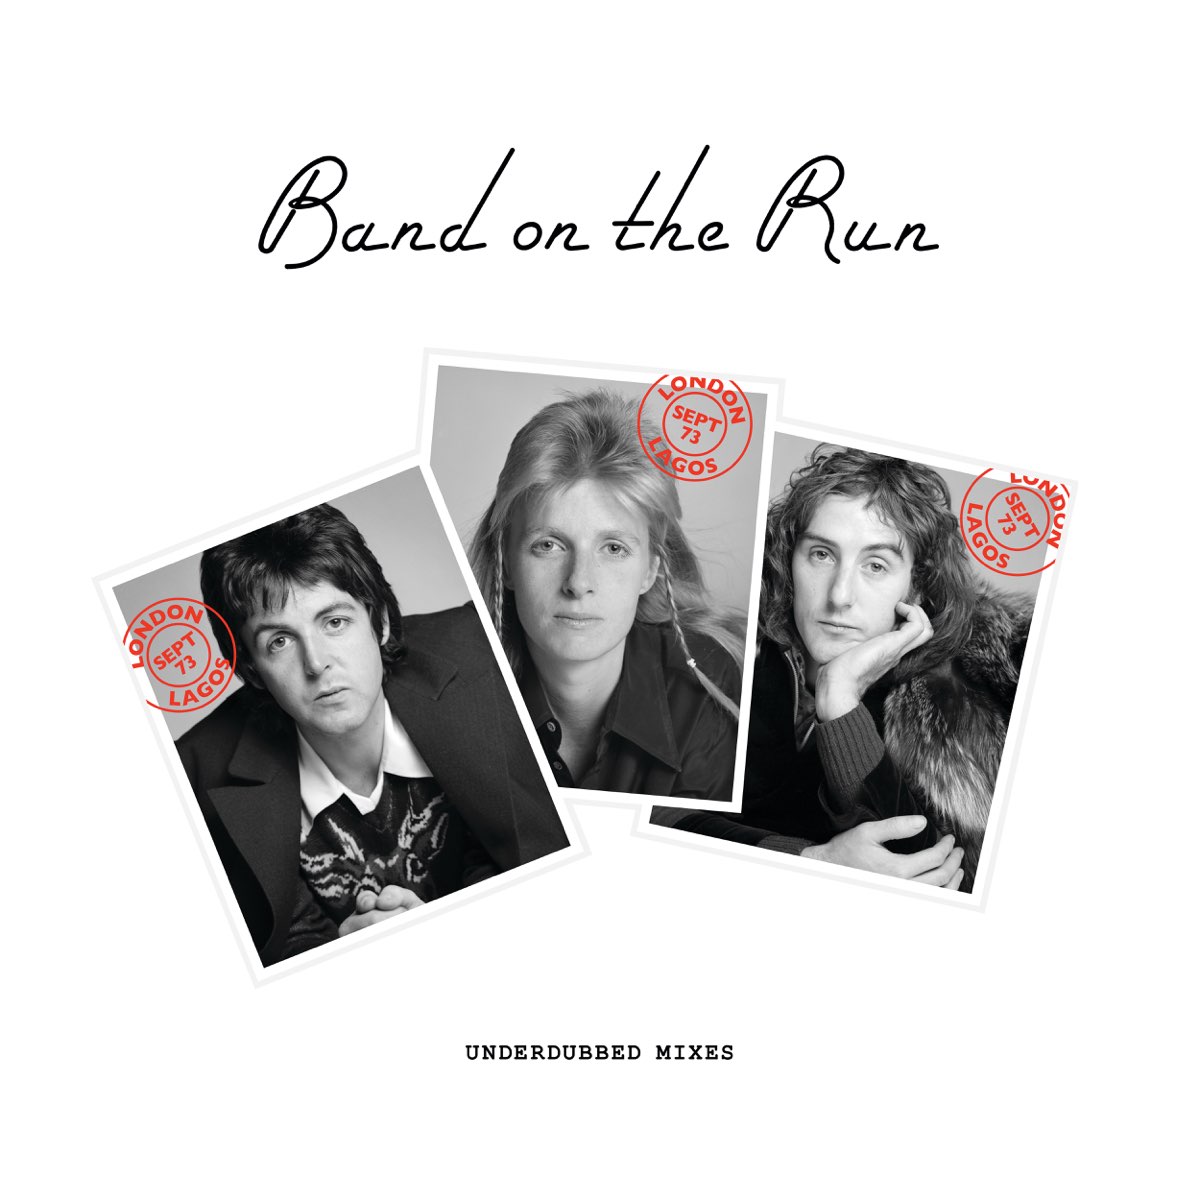 ‎Band On The Run (Underdubbed Mixes) Album by Paul McCartney & Wings